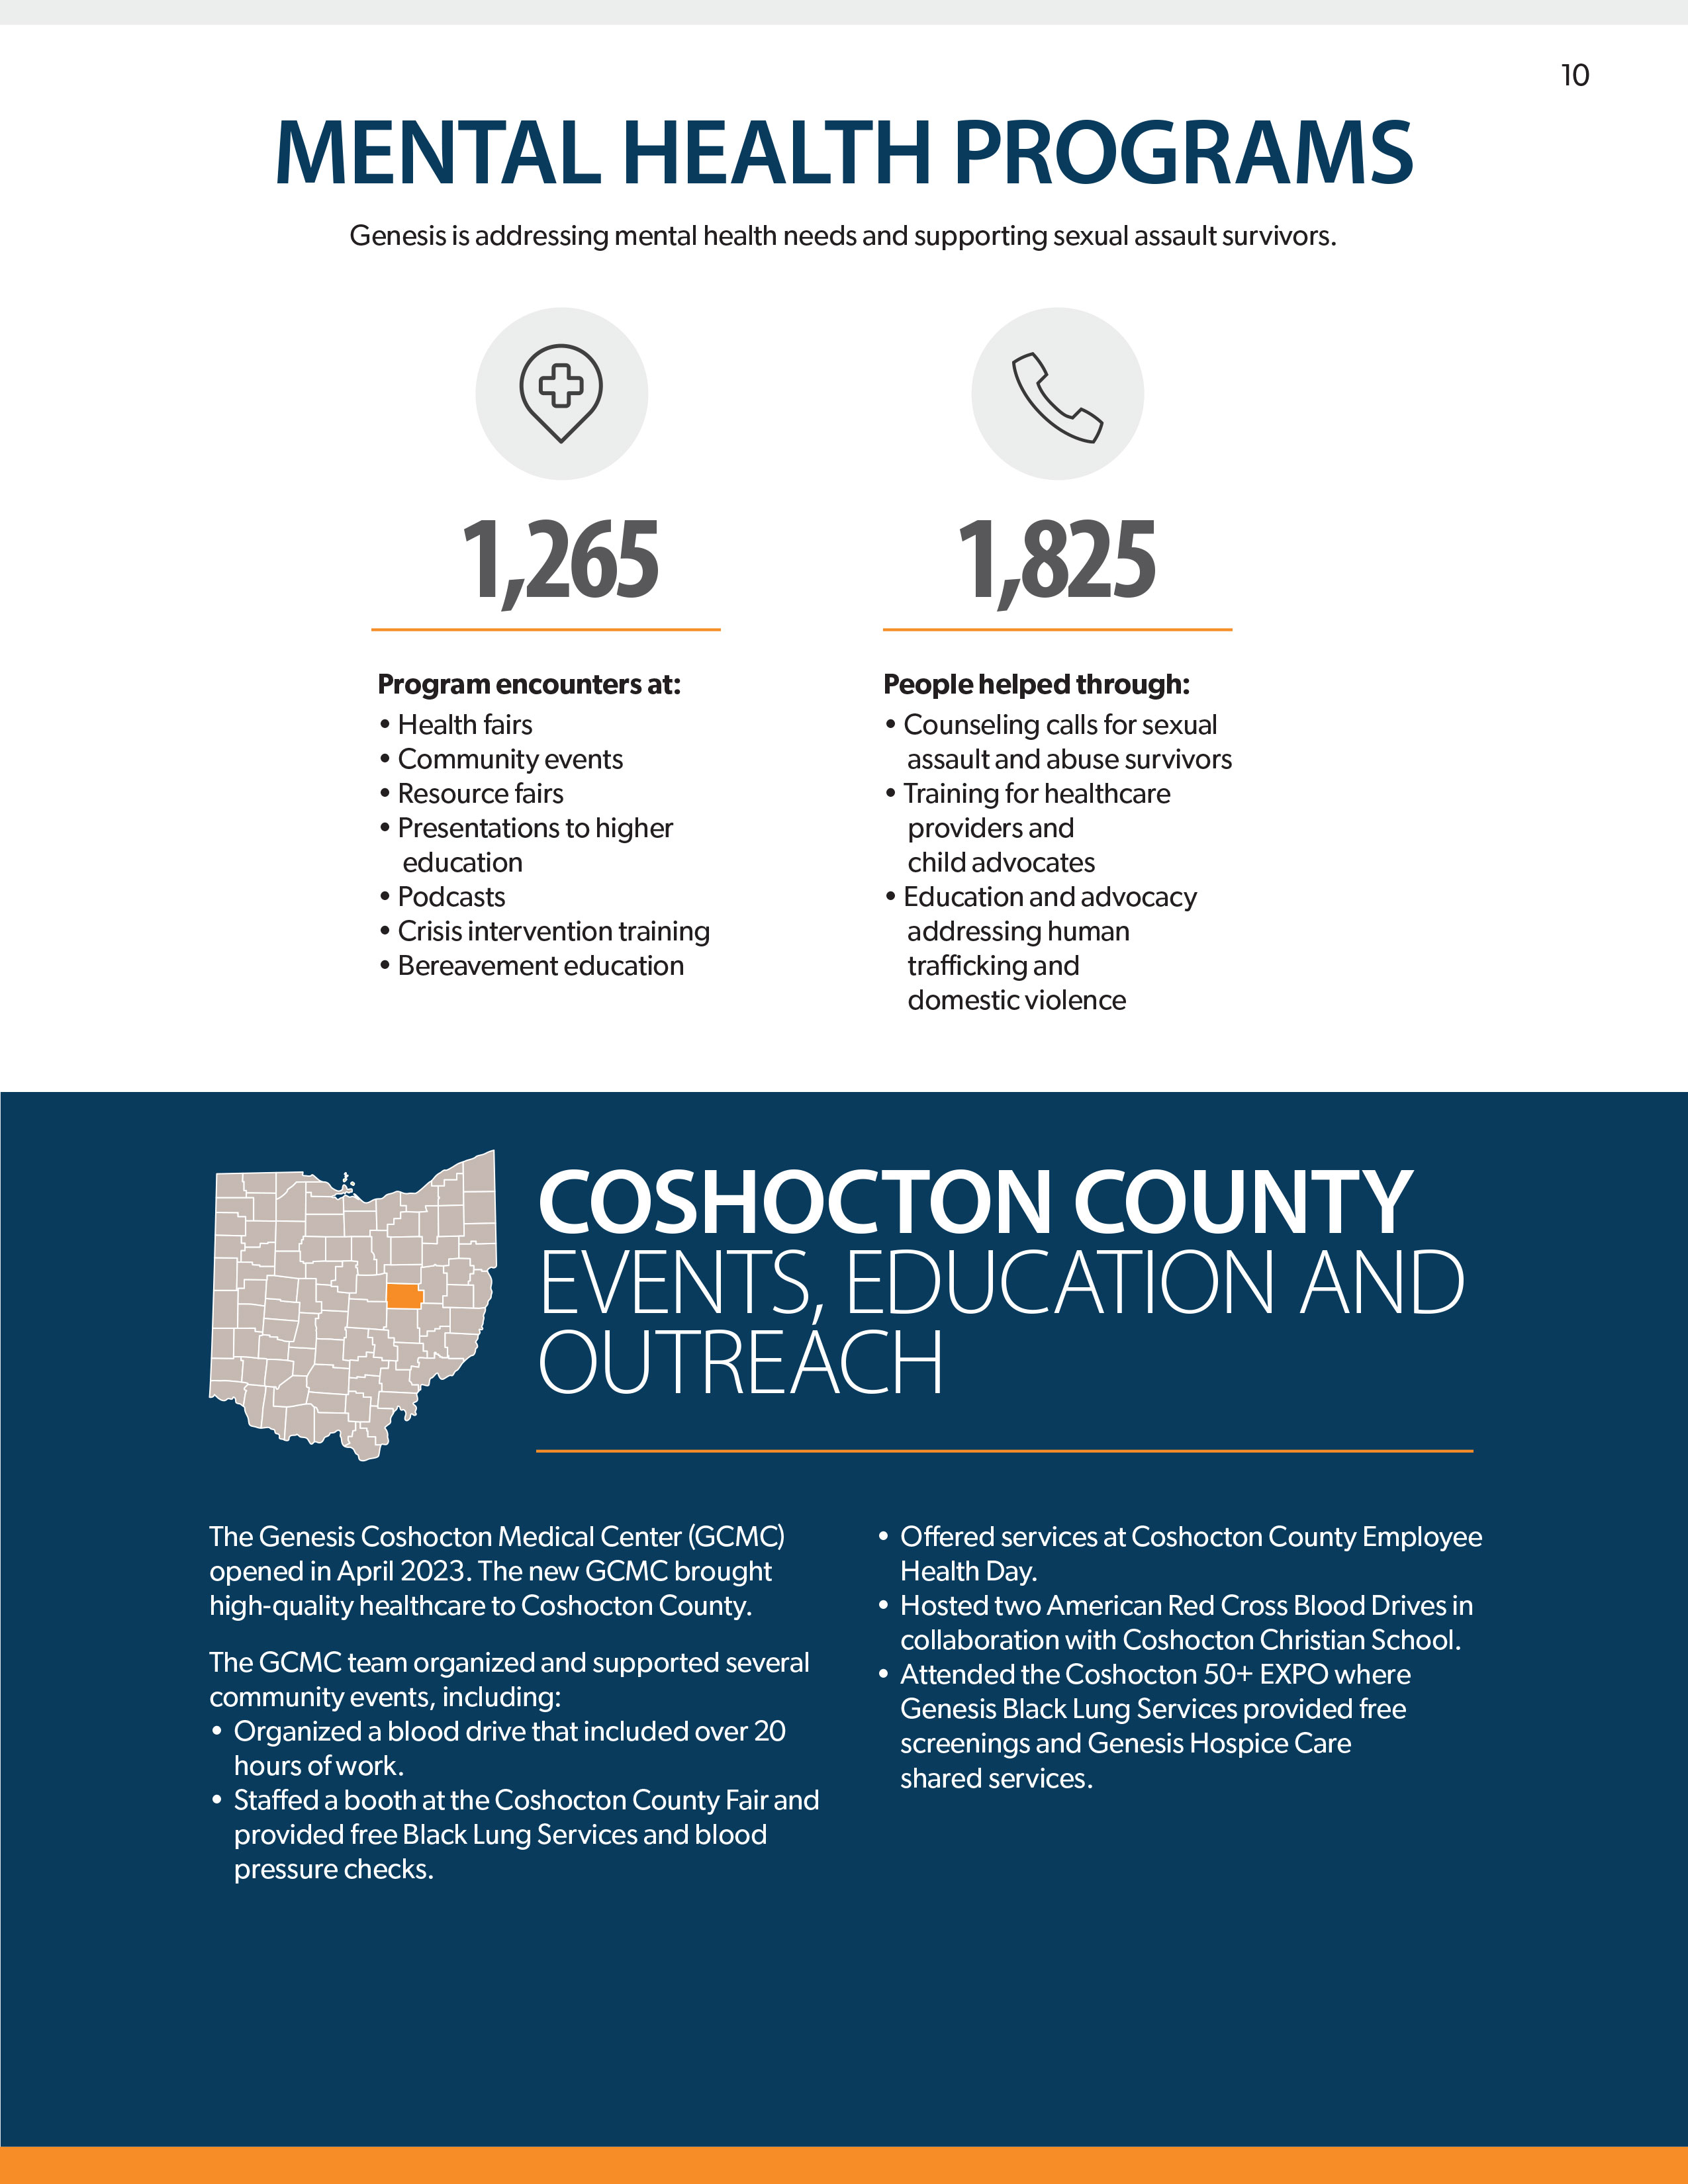 Mental health programs and Coshocton county outreach